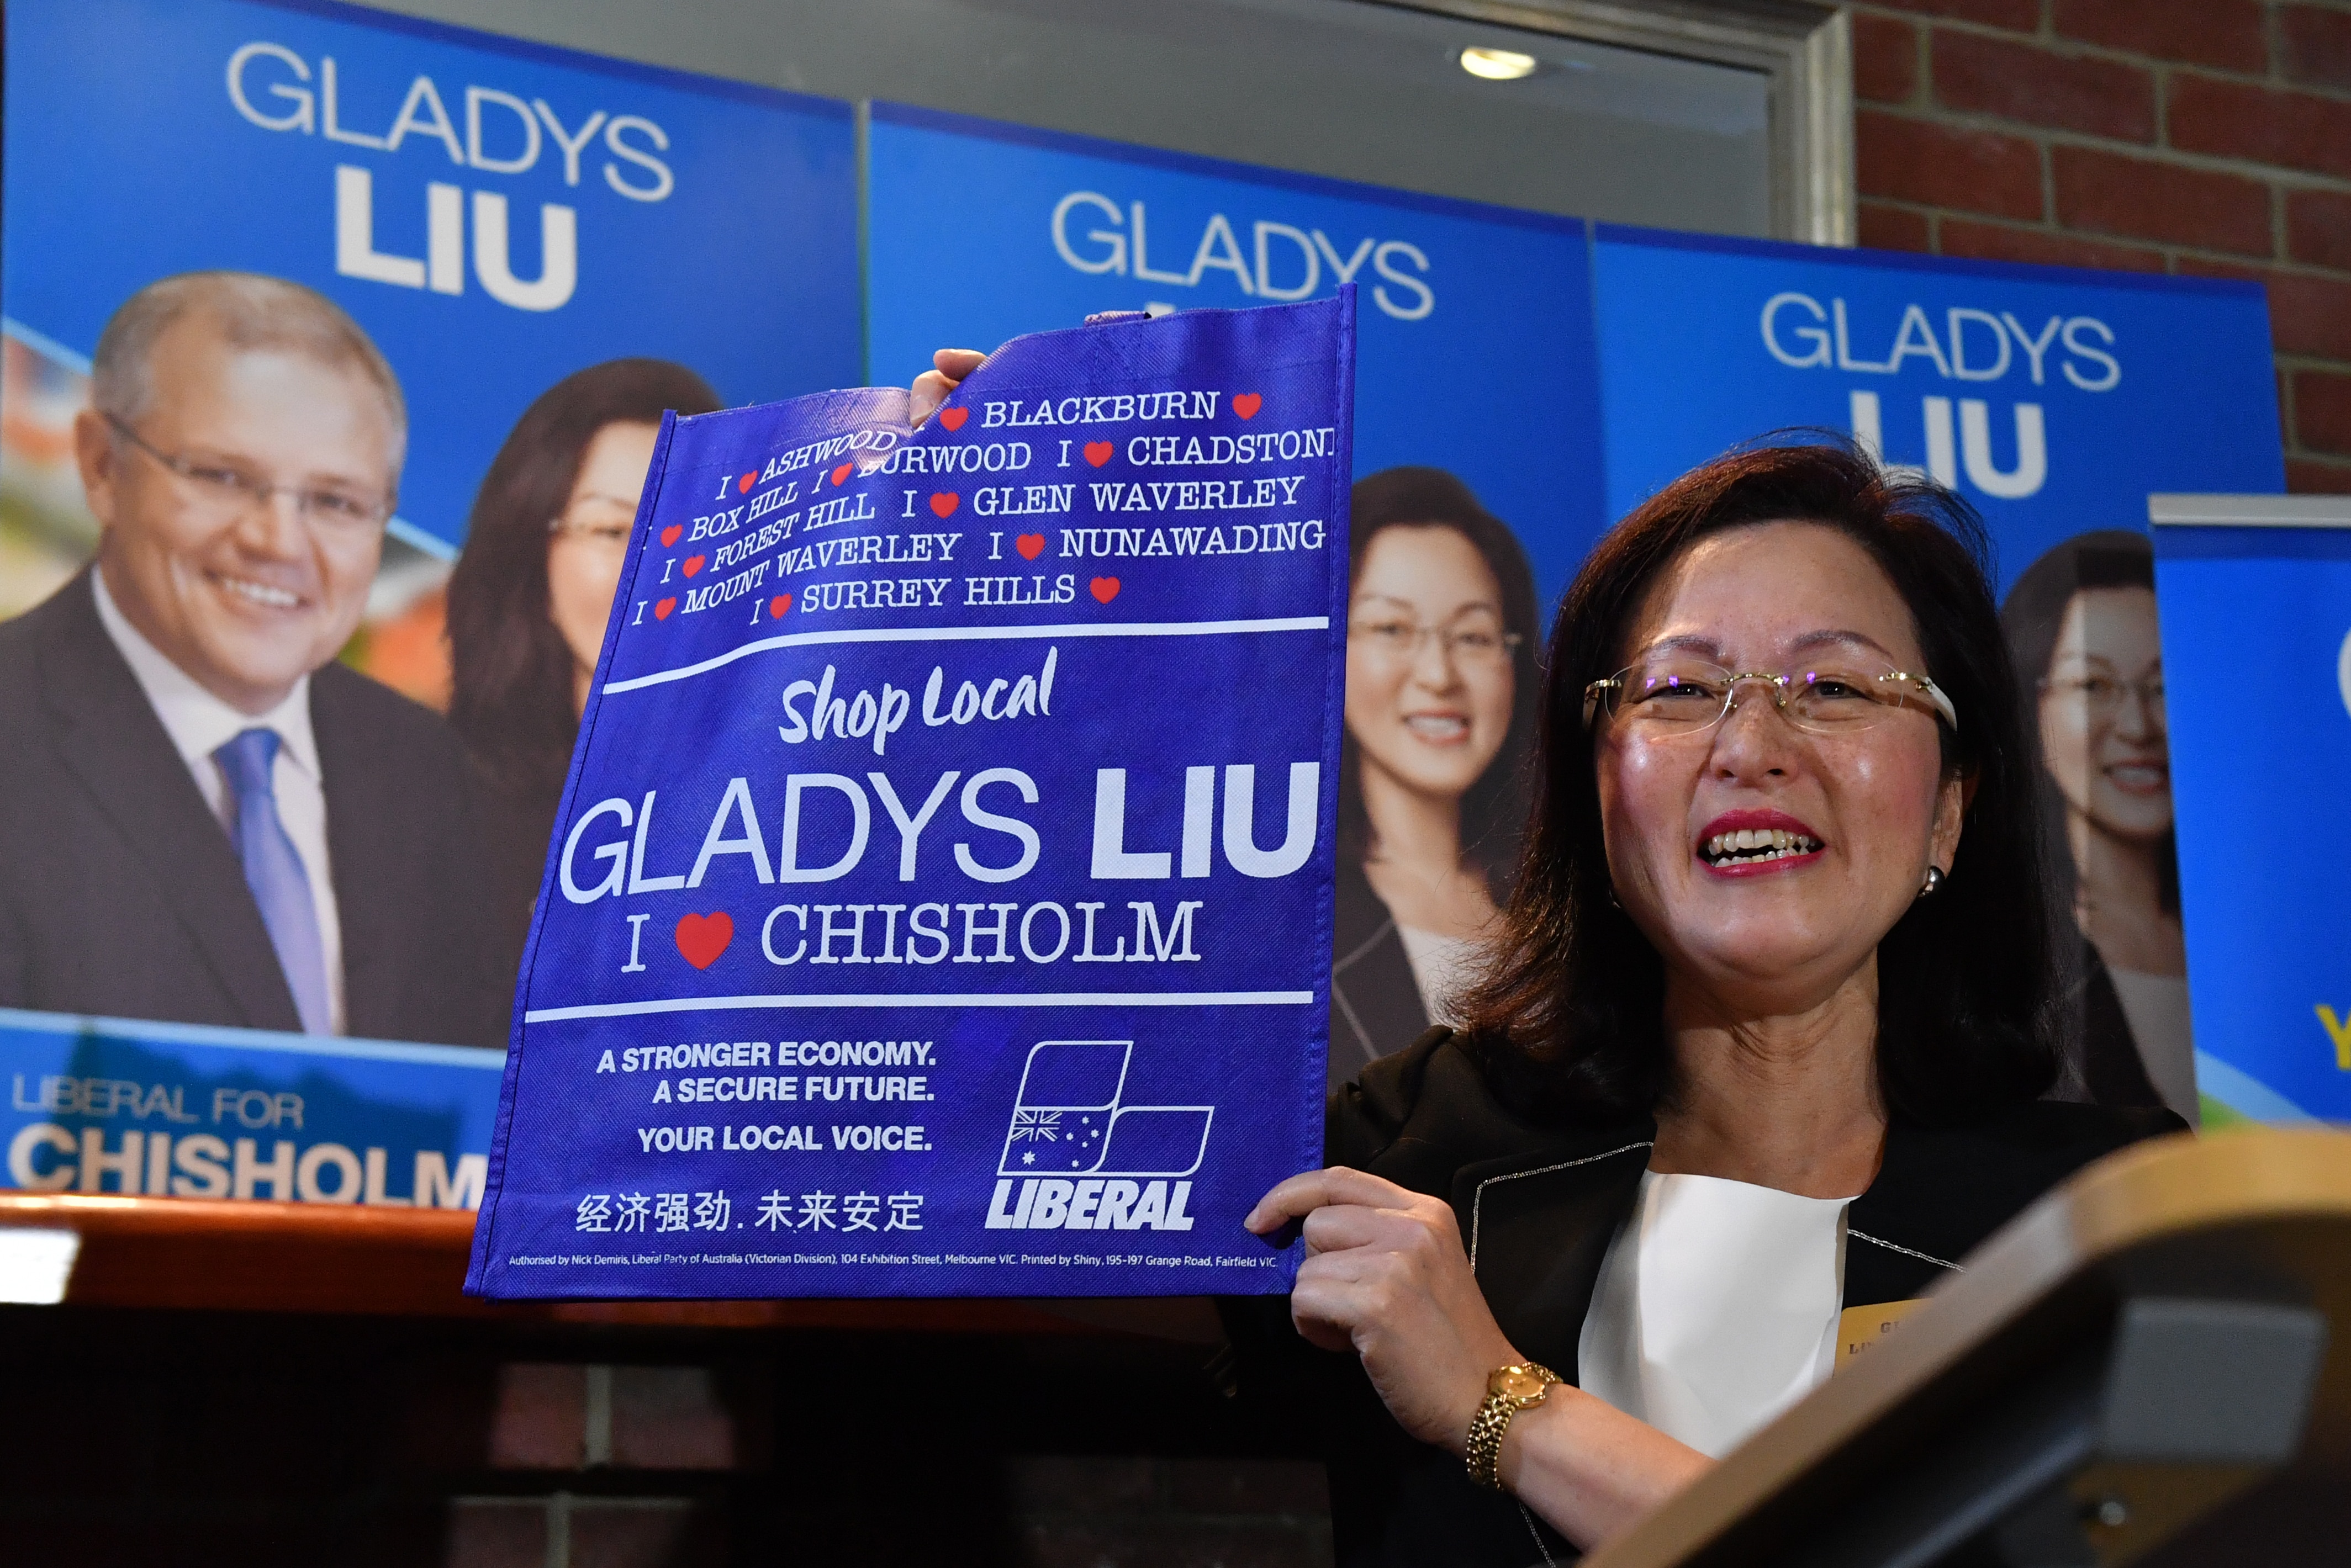 Liberal for Chisholm Gladys Liu secured a majority for the Coalition.